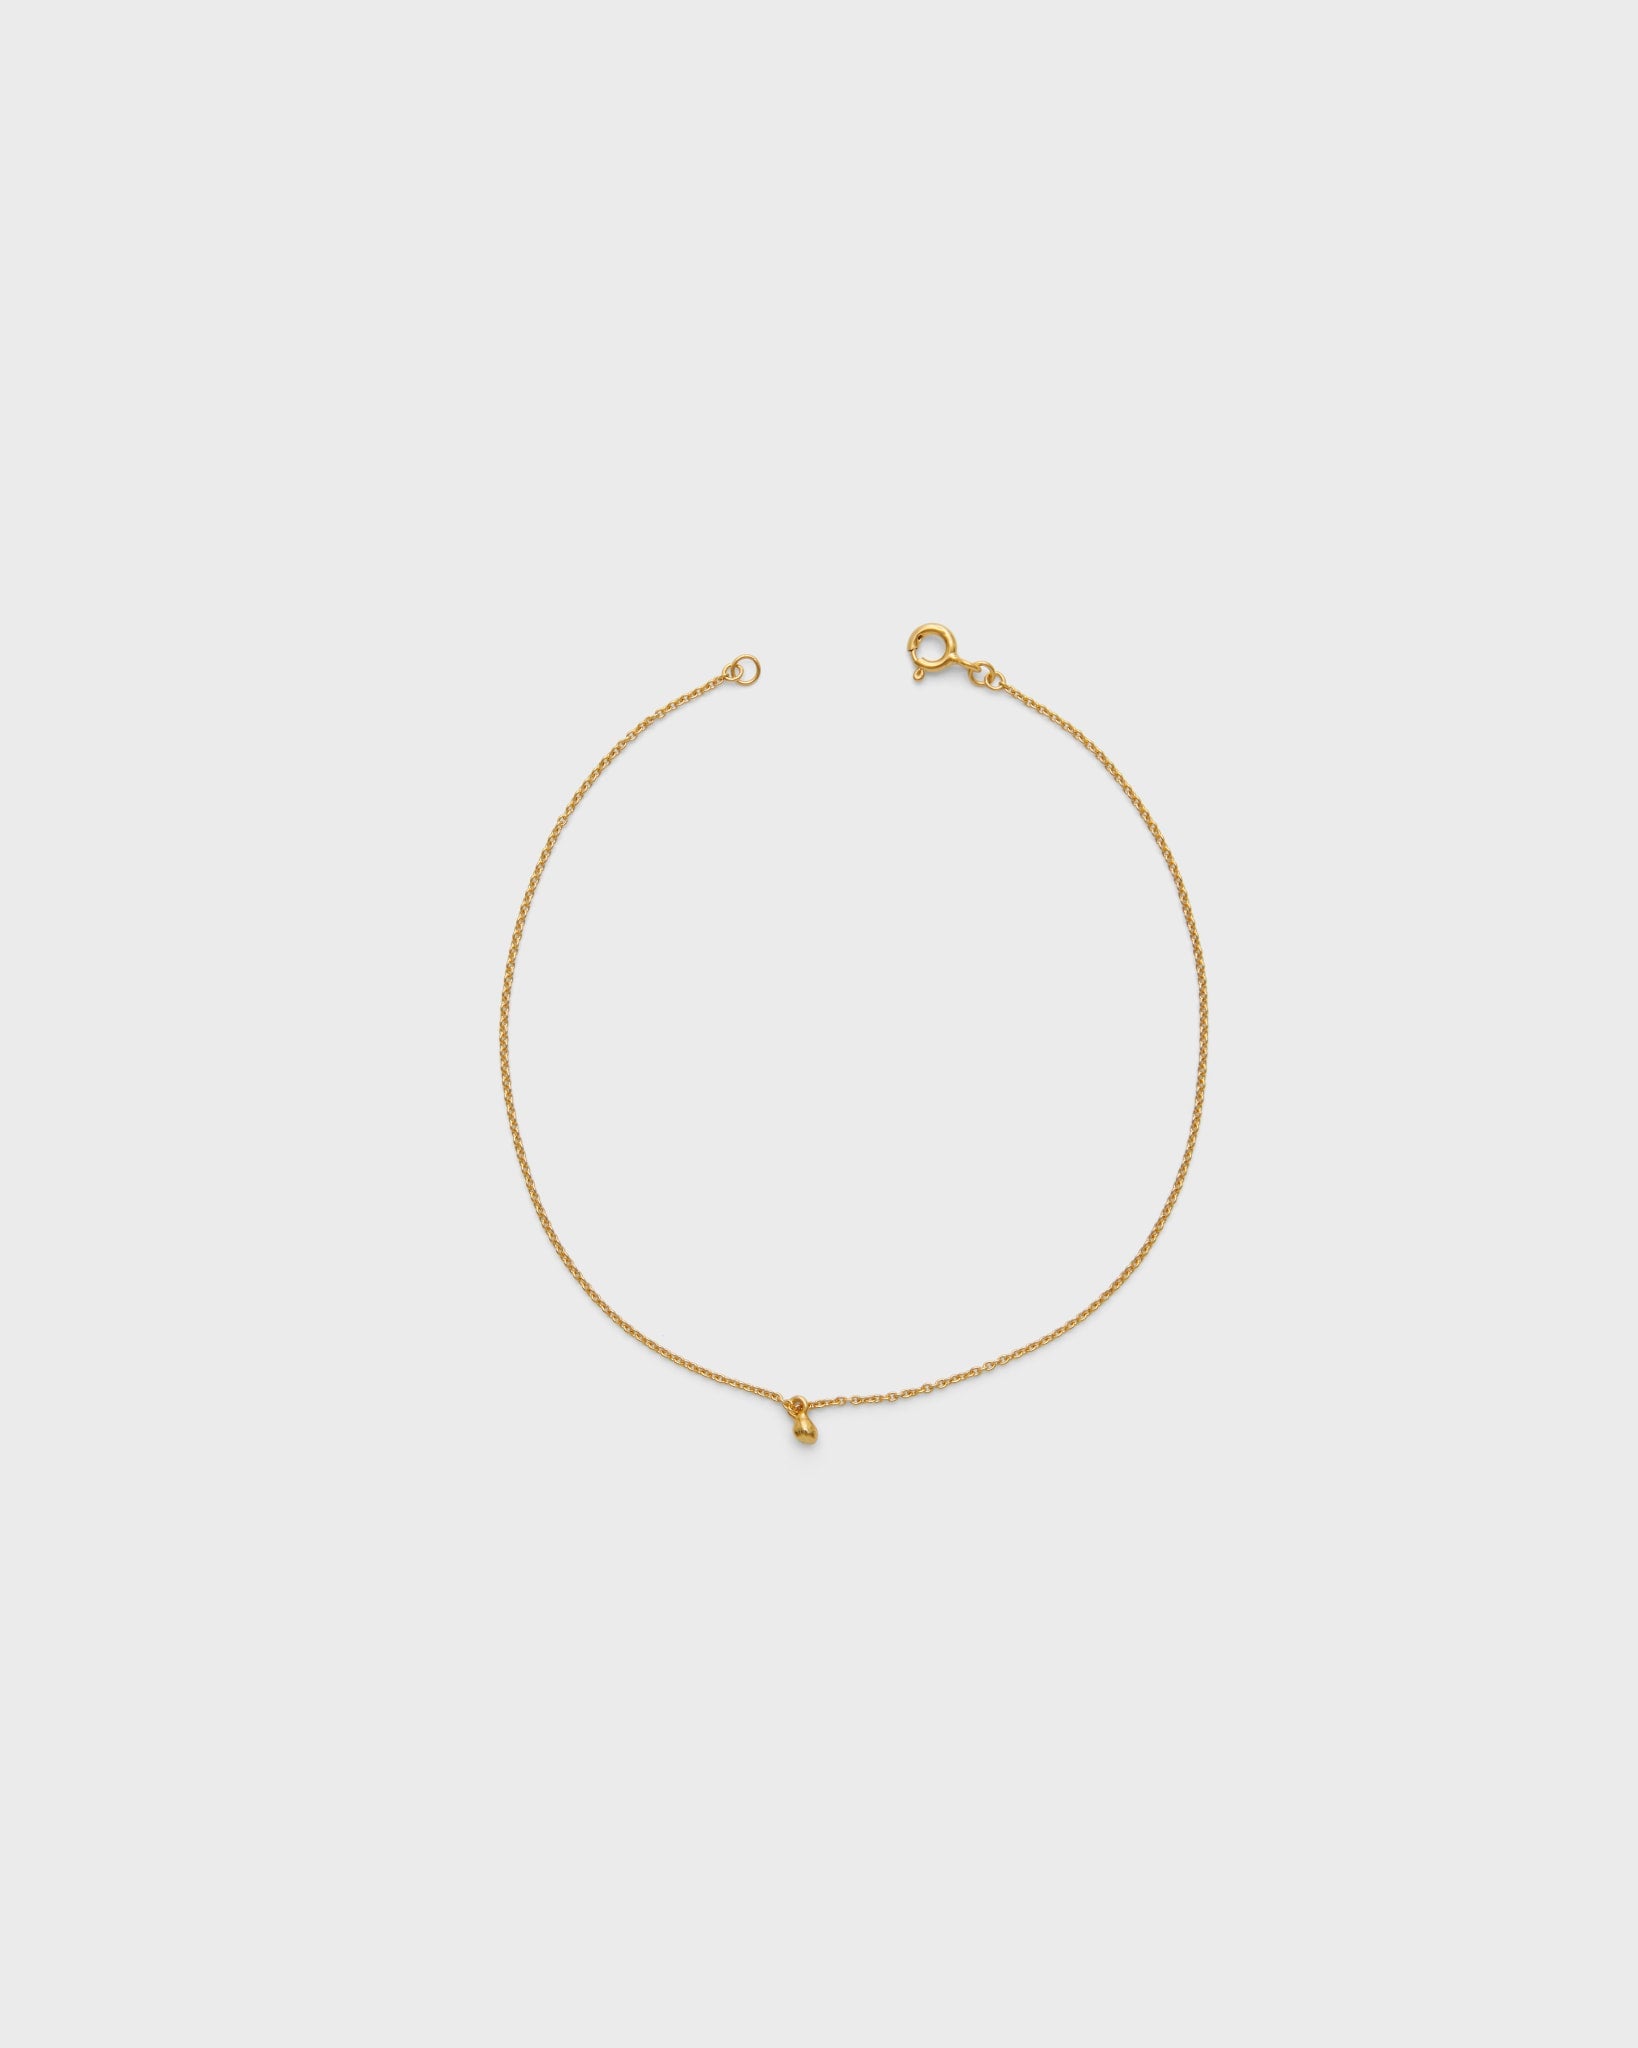 Anklets – Lea Hoyer Jewellery